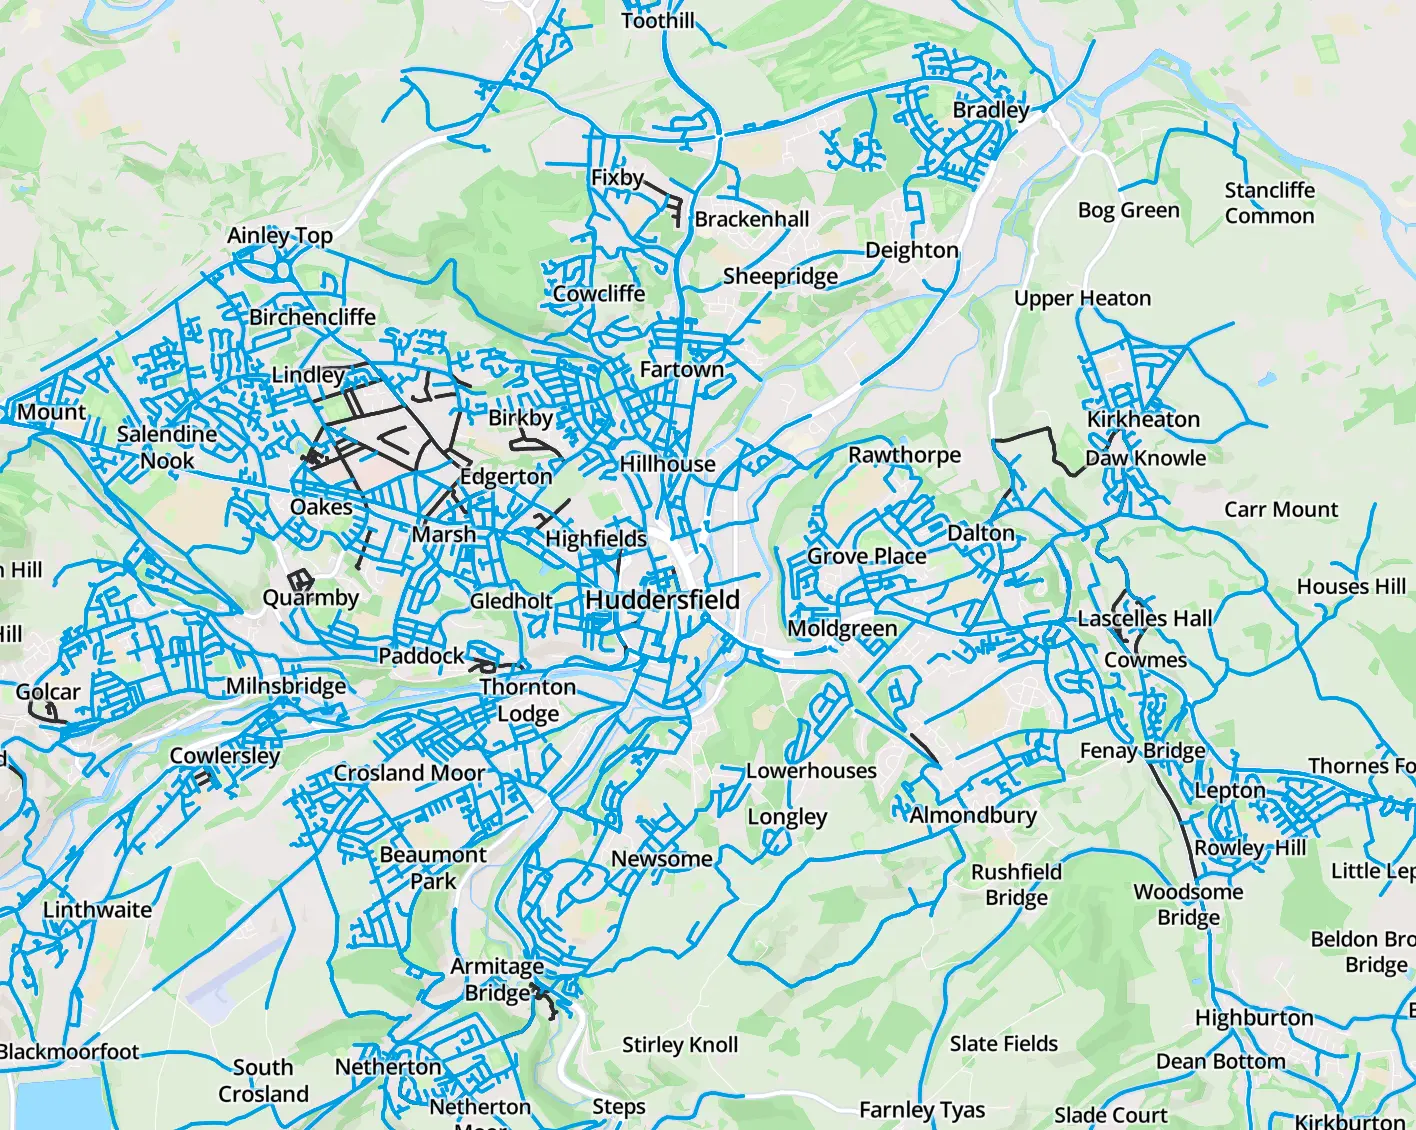 Map of Huddersfield with roads coloured in mostly blue to show all of the prayer walks that happened